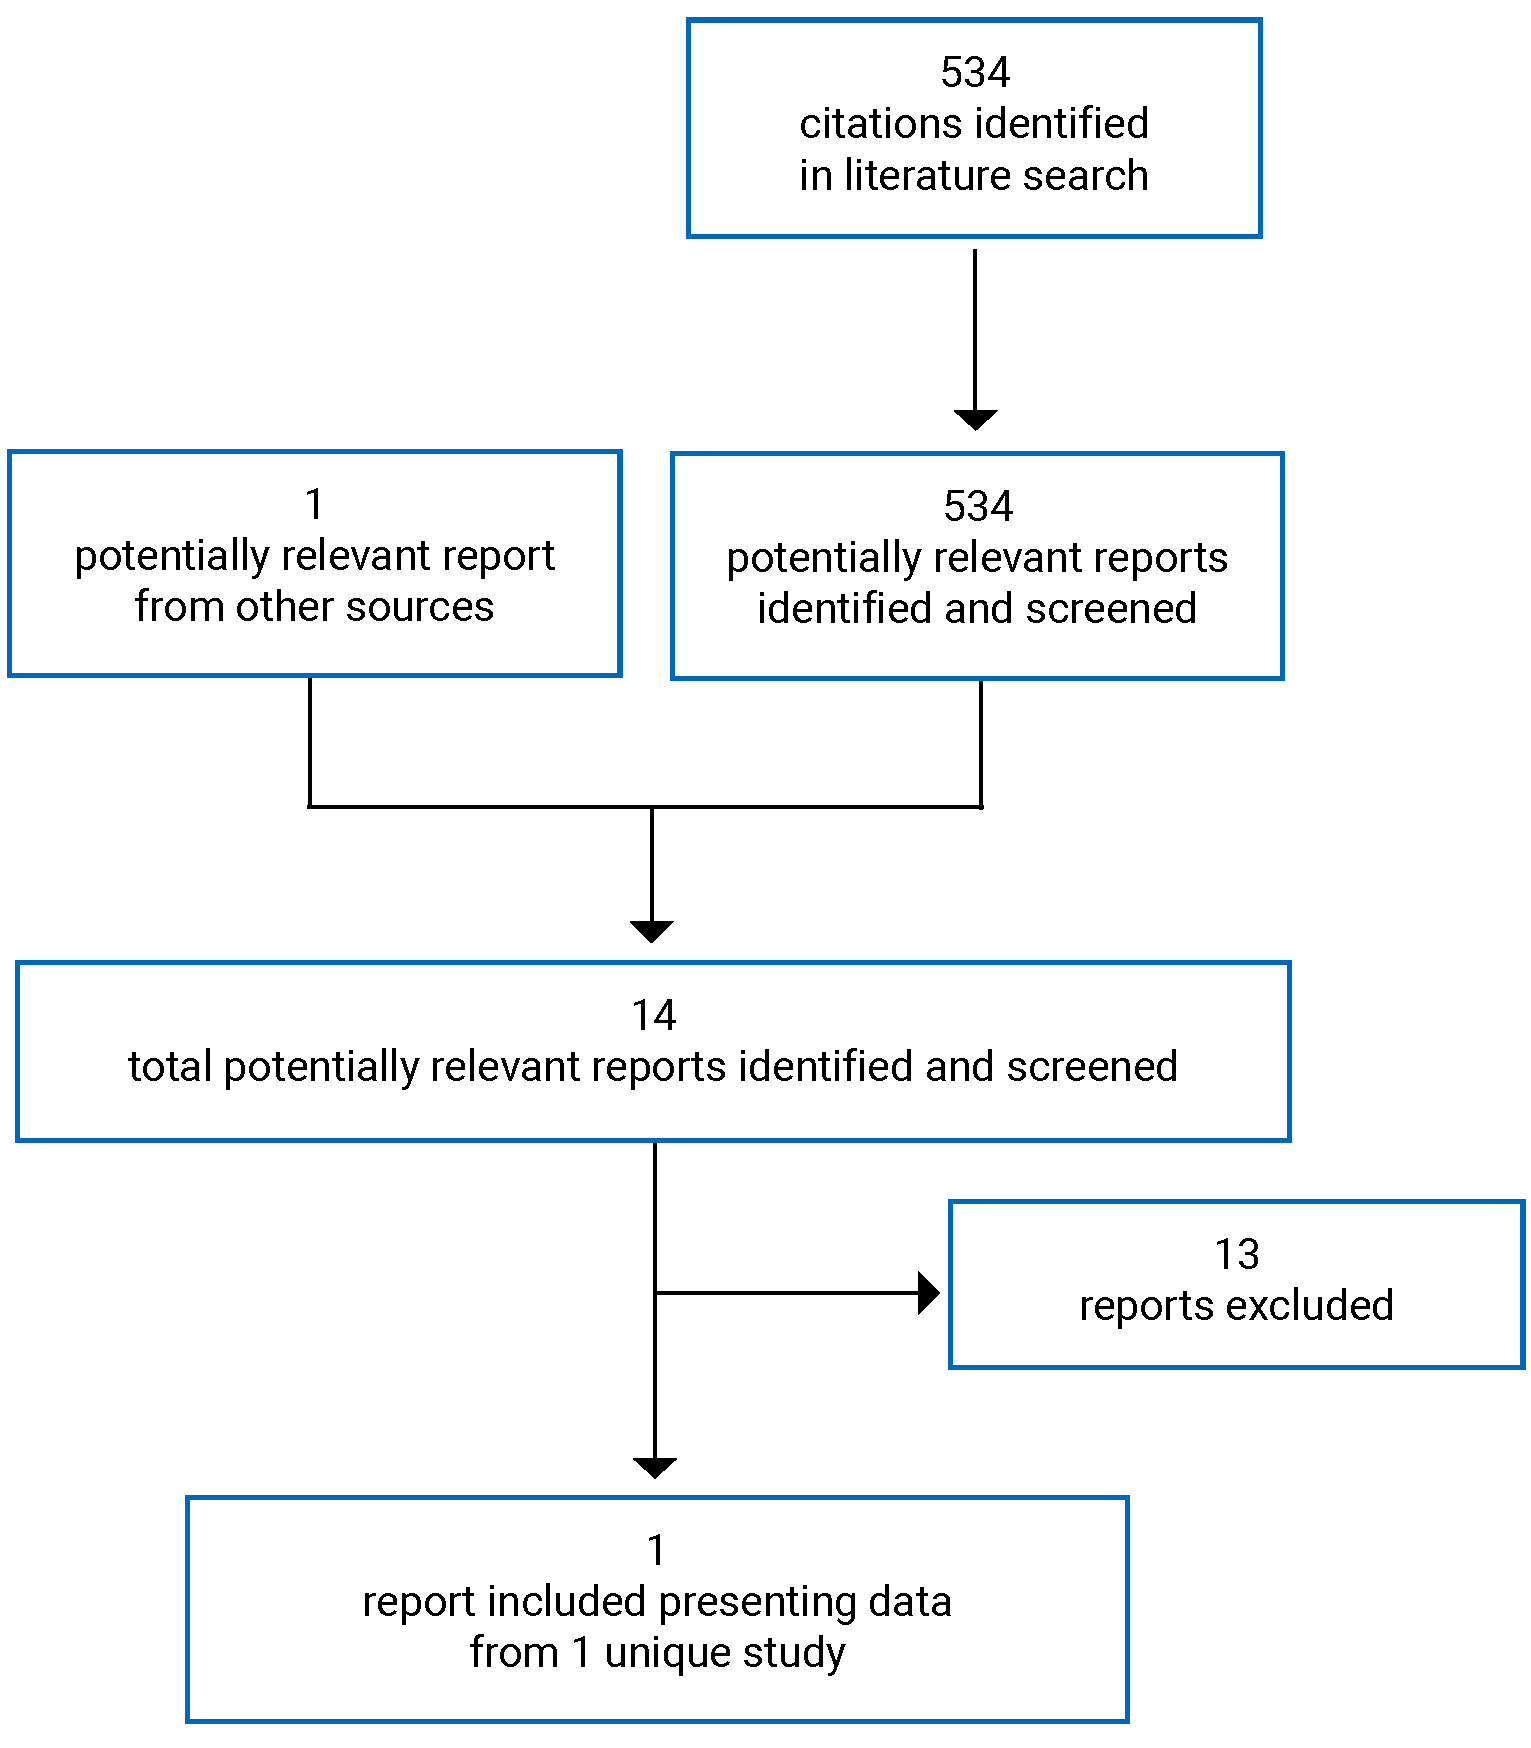 534 citations were identified in the literature search and 1 potentially relevant report was identified from other sources. From these, 14 potentially relevant full-text reports were retrieved and screened, of which 13 were excluded. In total, 1 report representing 1 unique study is included in the review.